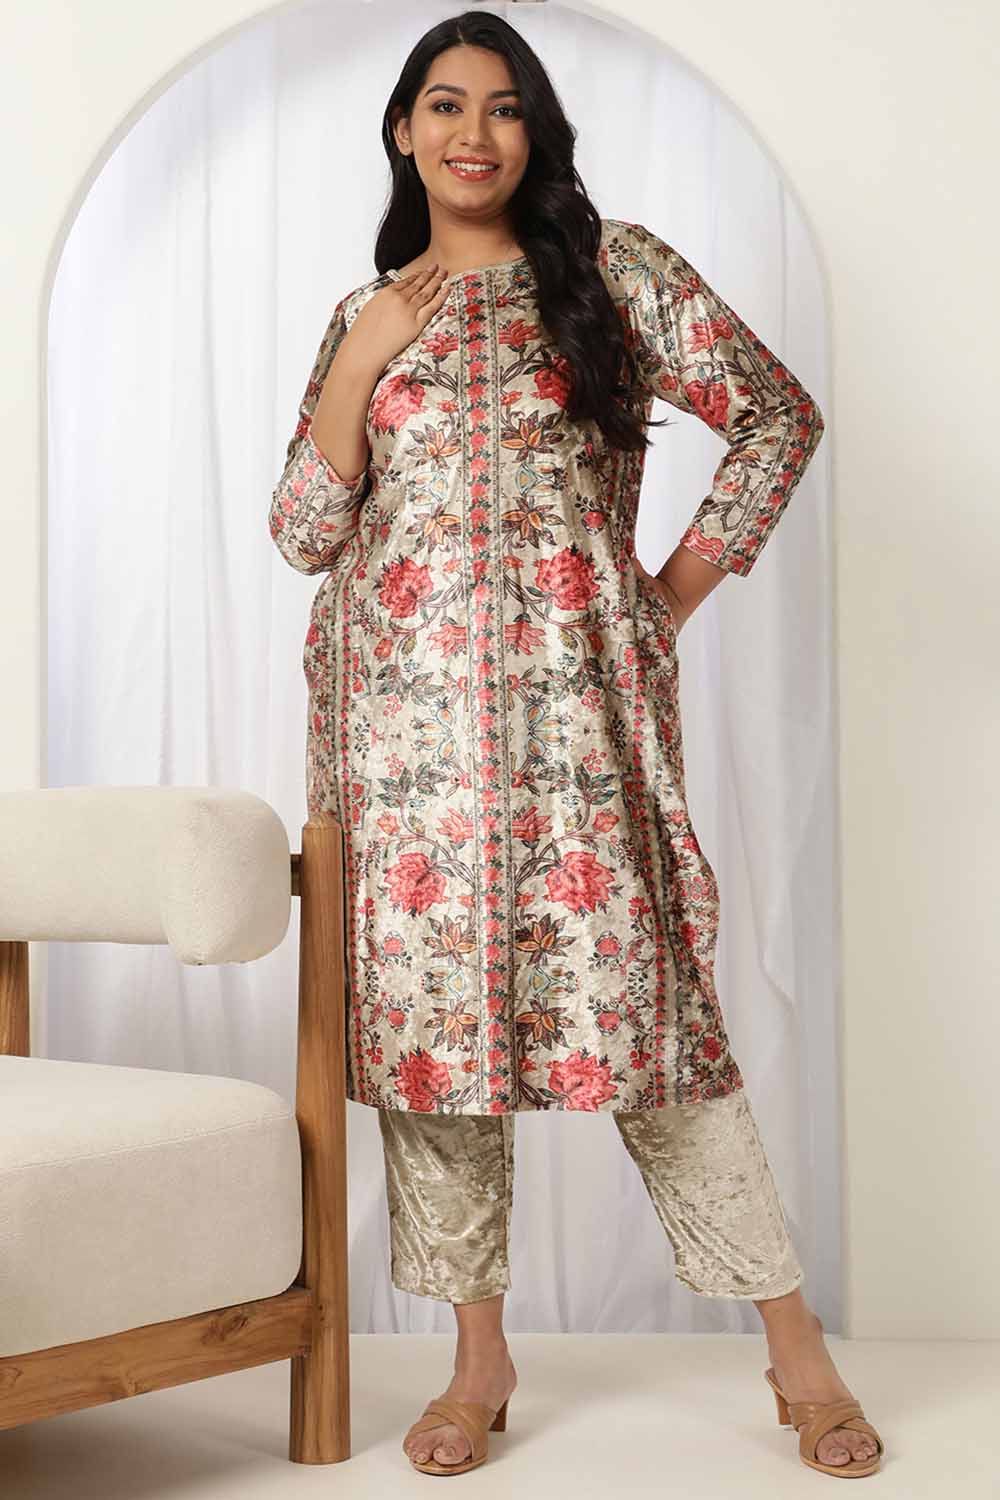 velvet kurtis design, velvet kurtis design Suppliers and